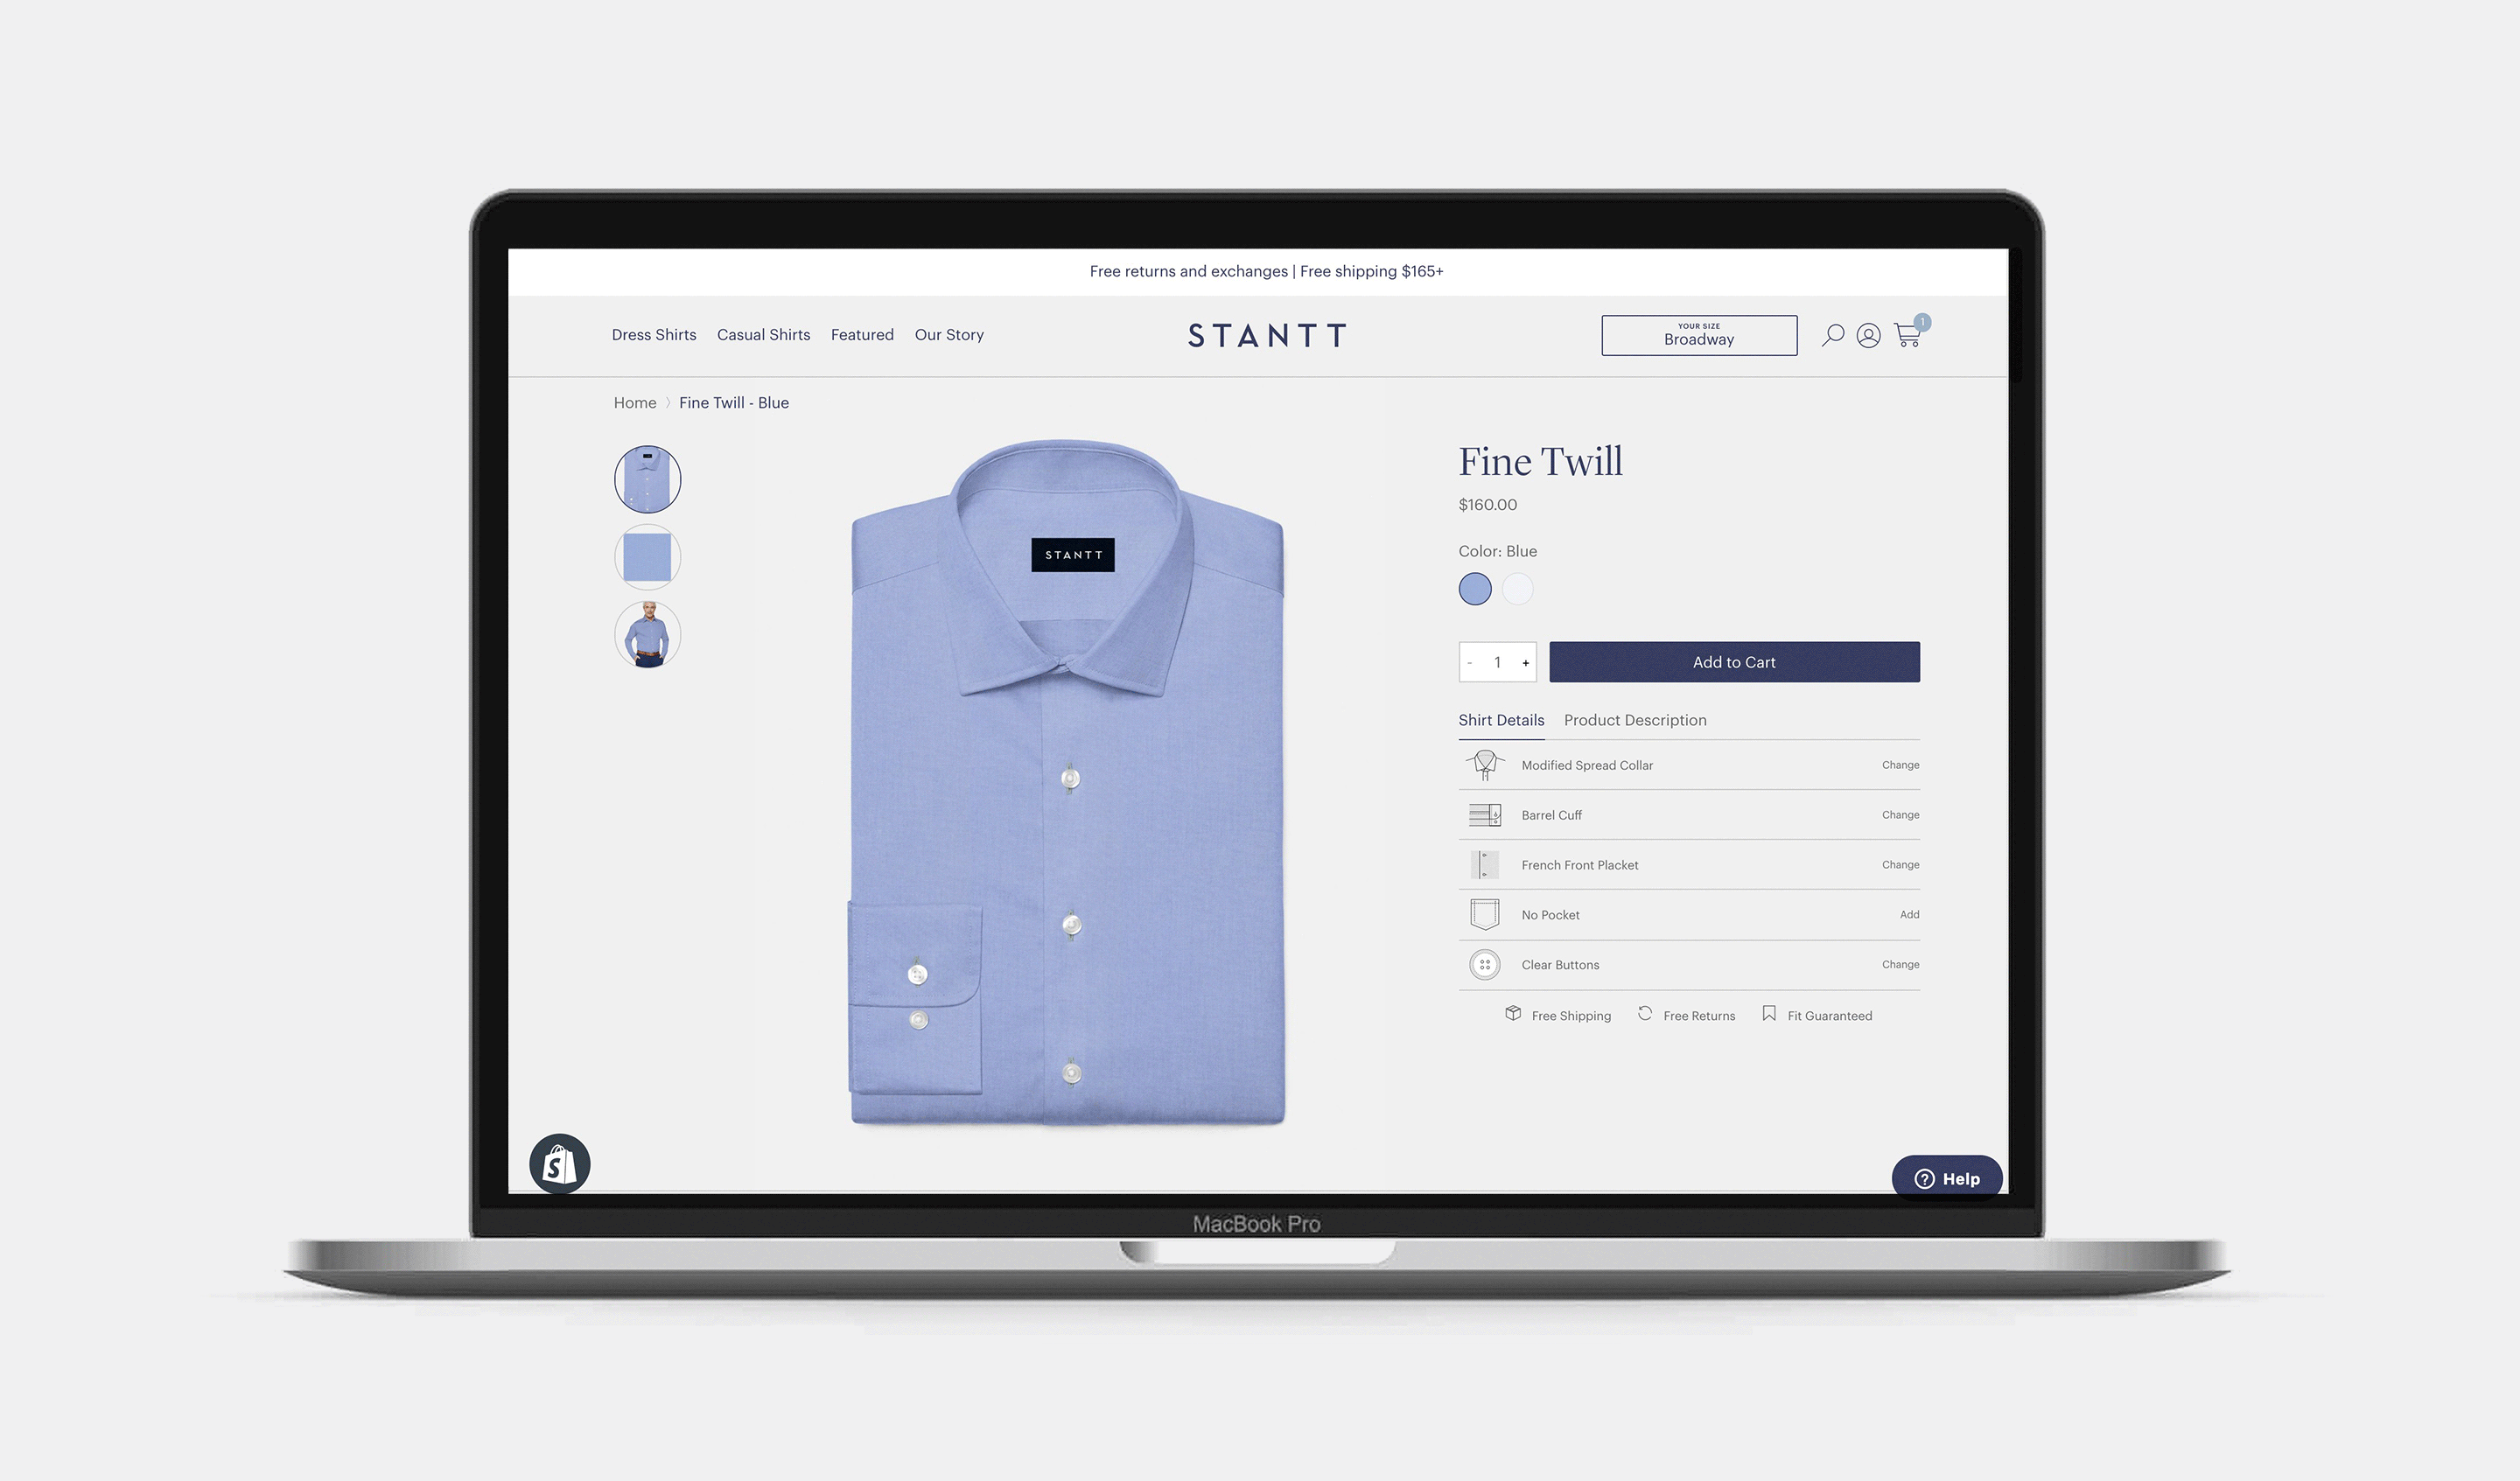 Customize your shirts and pants with the knowledge that they'll fit perfectly. All garments are hand-crafted just for you and delivered within 10-14 days.